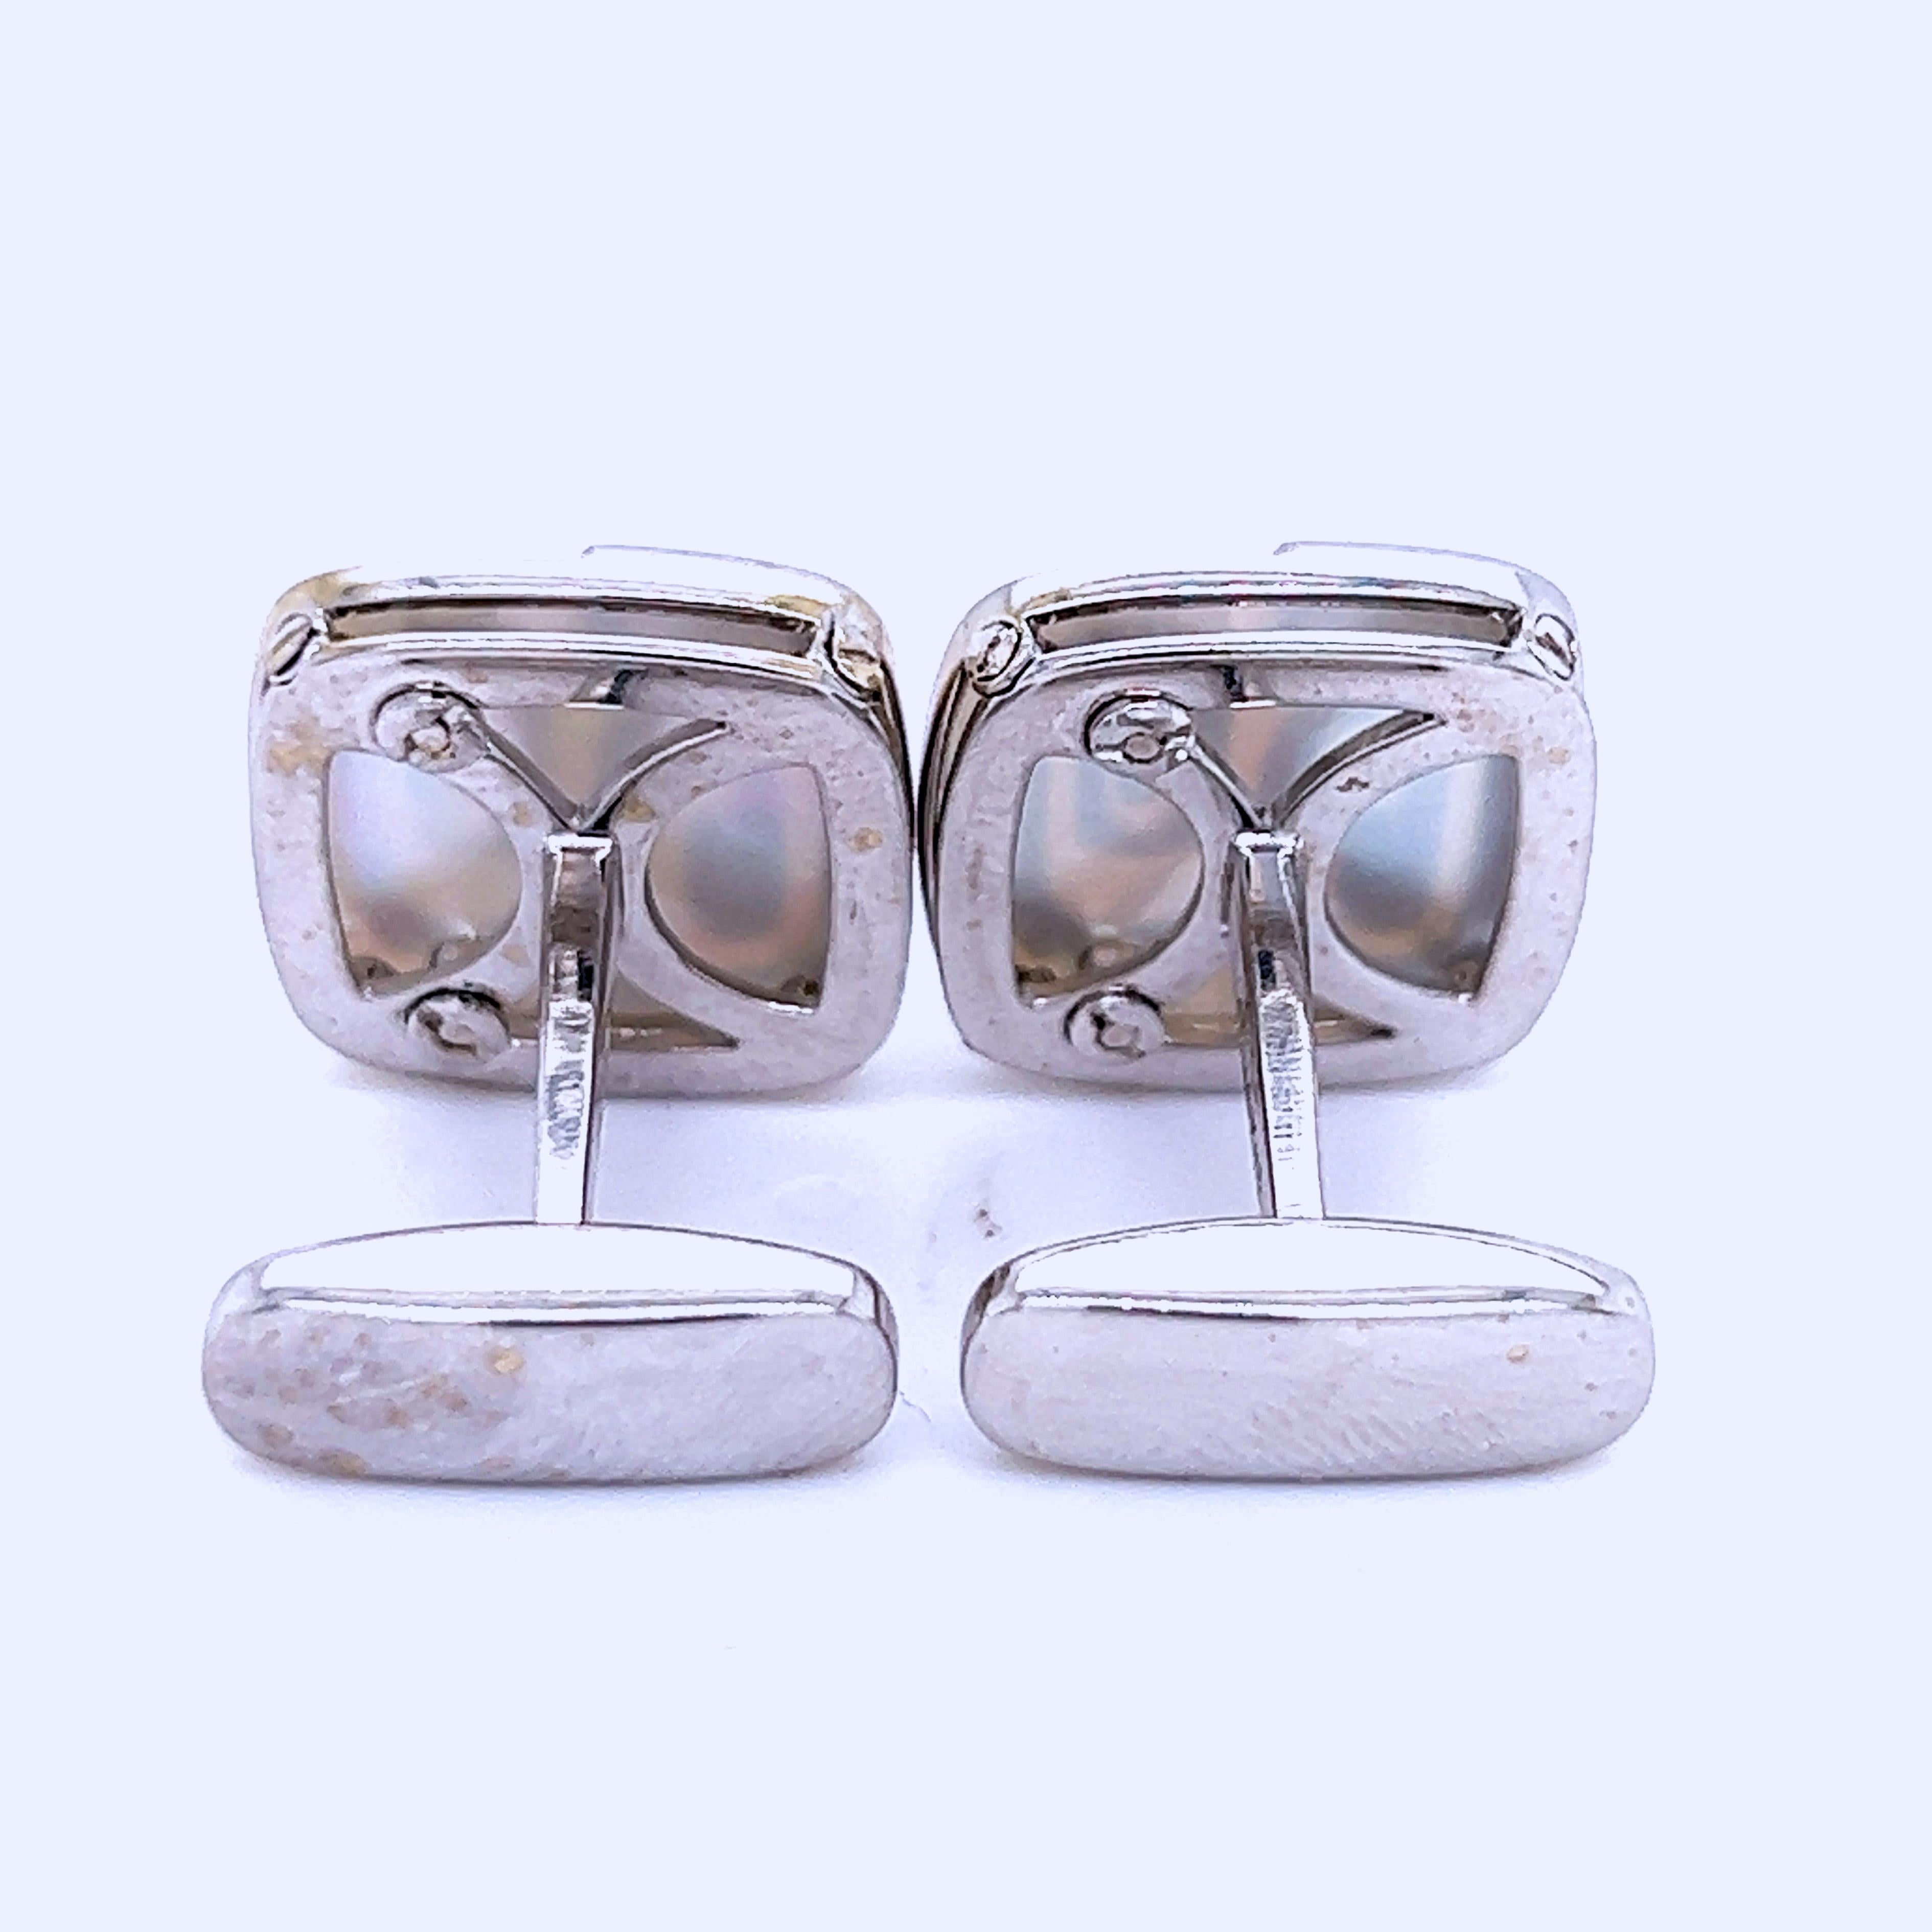 Original 1970 Bulgari Optical White Gold Cufflinks In Excellent Condition For Sale In Valenza, IT